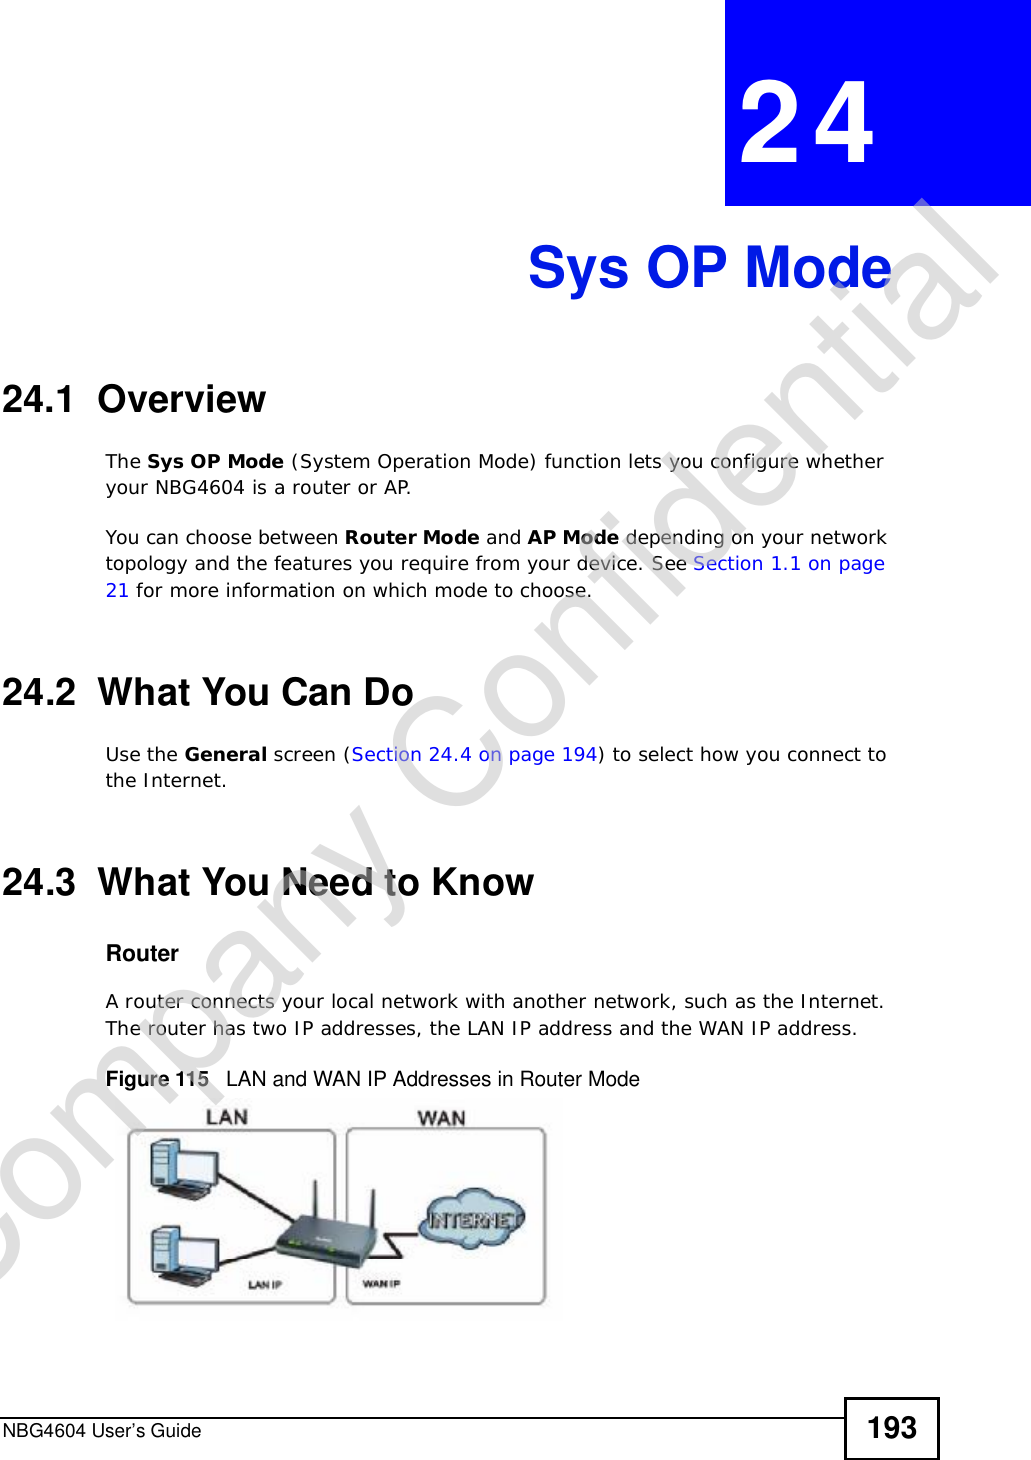 NBG4604 User’s Guide 193CHAPTER 24Sys OP Mode24.1  OverviewThe Sys OP Mode (System Operation Mode) function lets you configure whether your NBG4604 is a router or AP. You can choose between Router Mode and AP Mode depending on your network topology and the features you require from your device. See Section 1.1 on page 21 for more information on which mode to choose.24.2  What You Can DoUse the General screen (Section 24.4 on page 194) to select how you connect to the Internet. 24.3  What You Need to KnowRouterA router connects your local network with another network, such as the Internet. The router has two IP addresses, the LAN IP address and the WAN IP address.Figure 115   LAN and WAN IP Addresses in Router ModeCompany Confidential